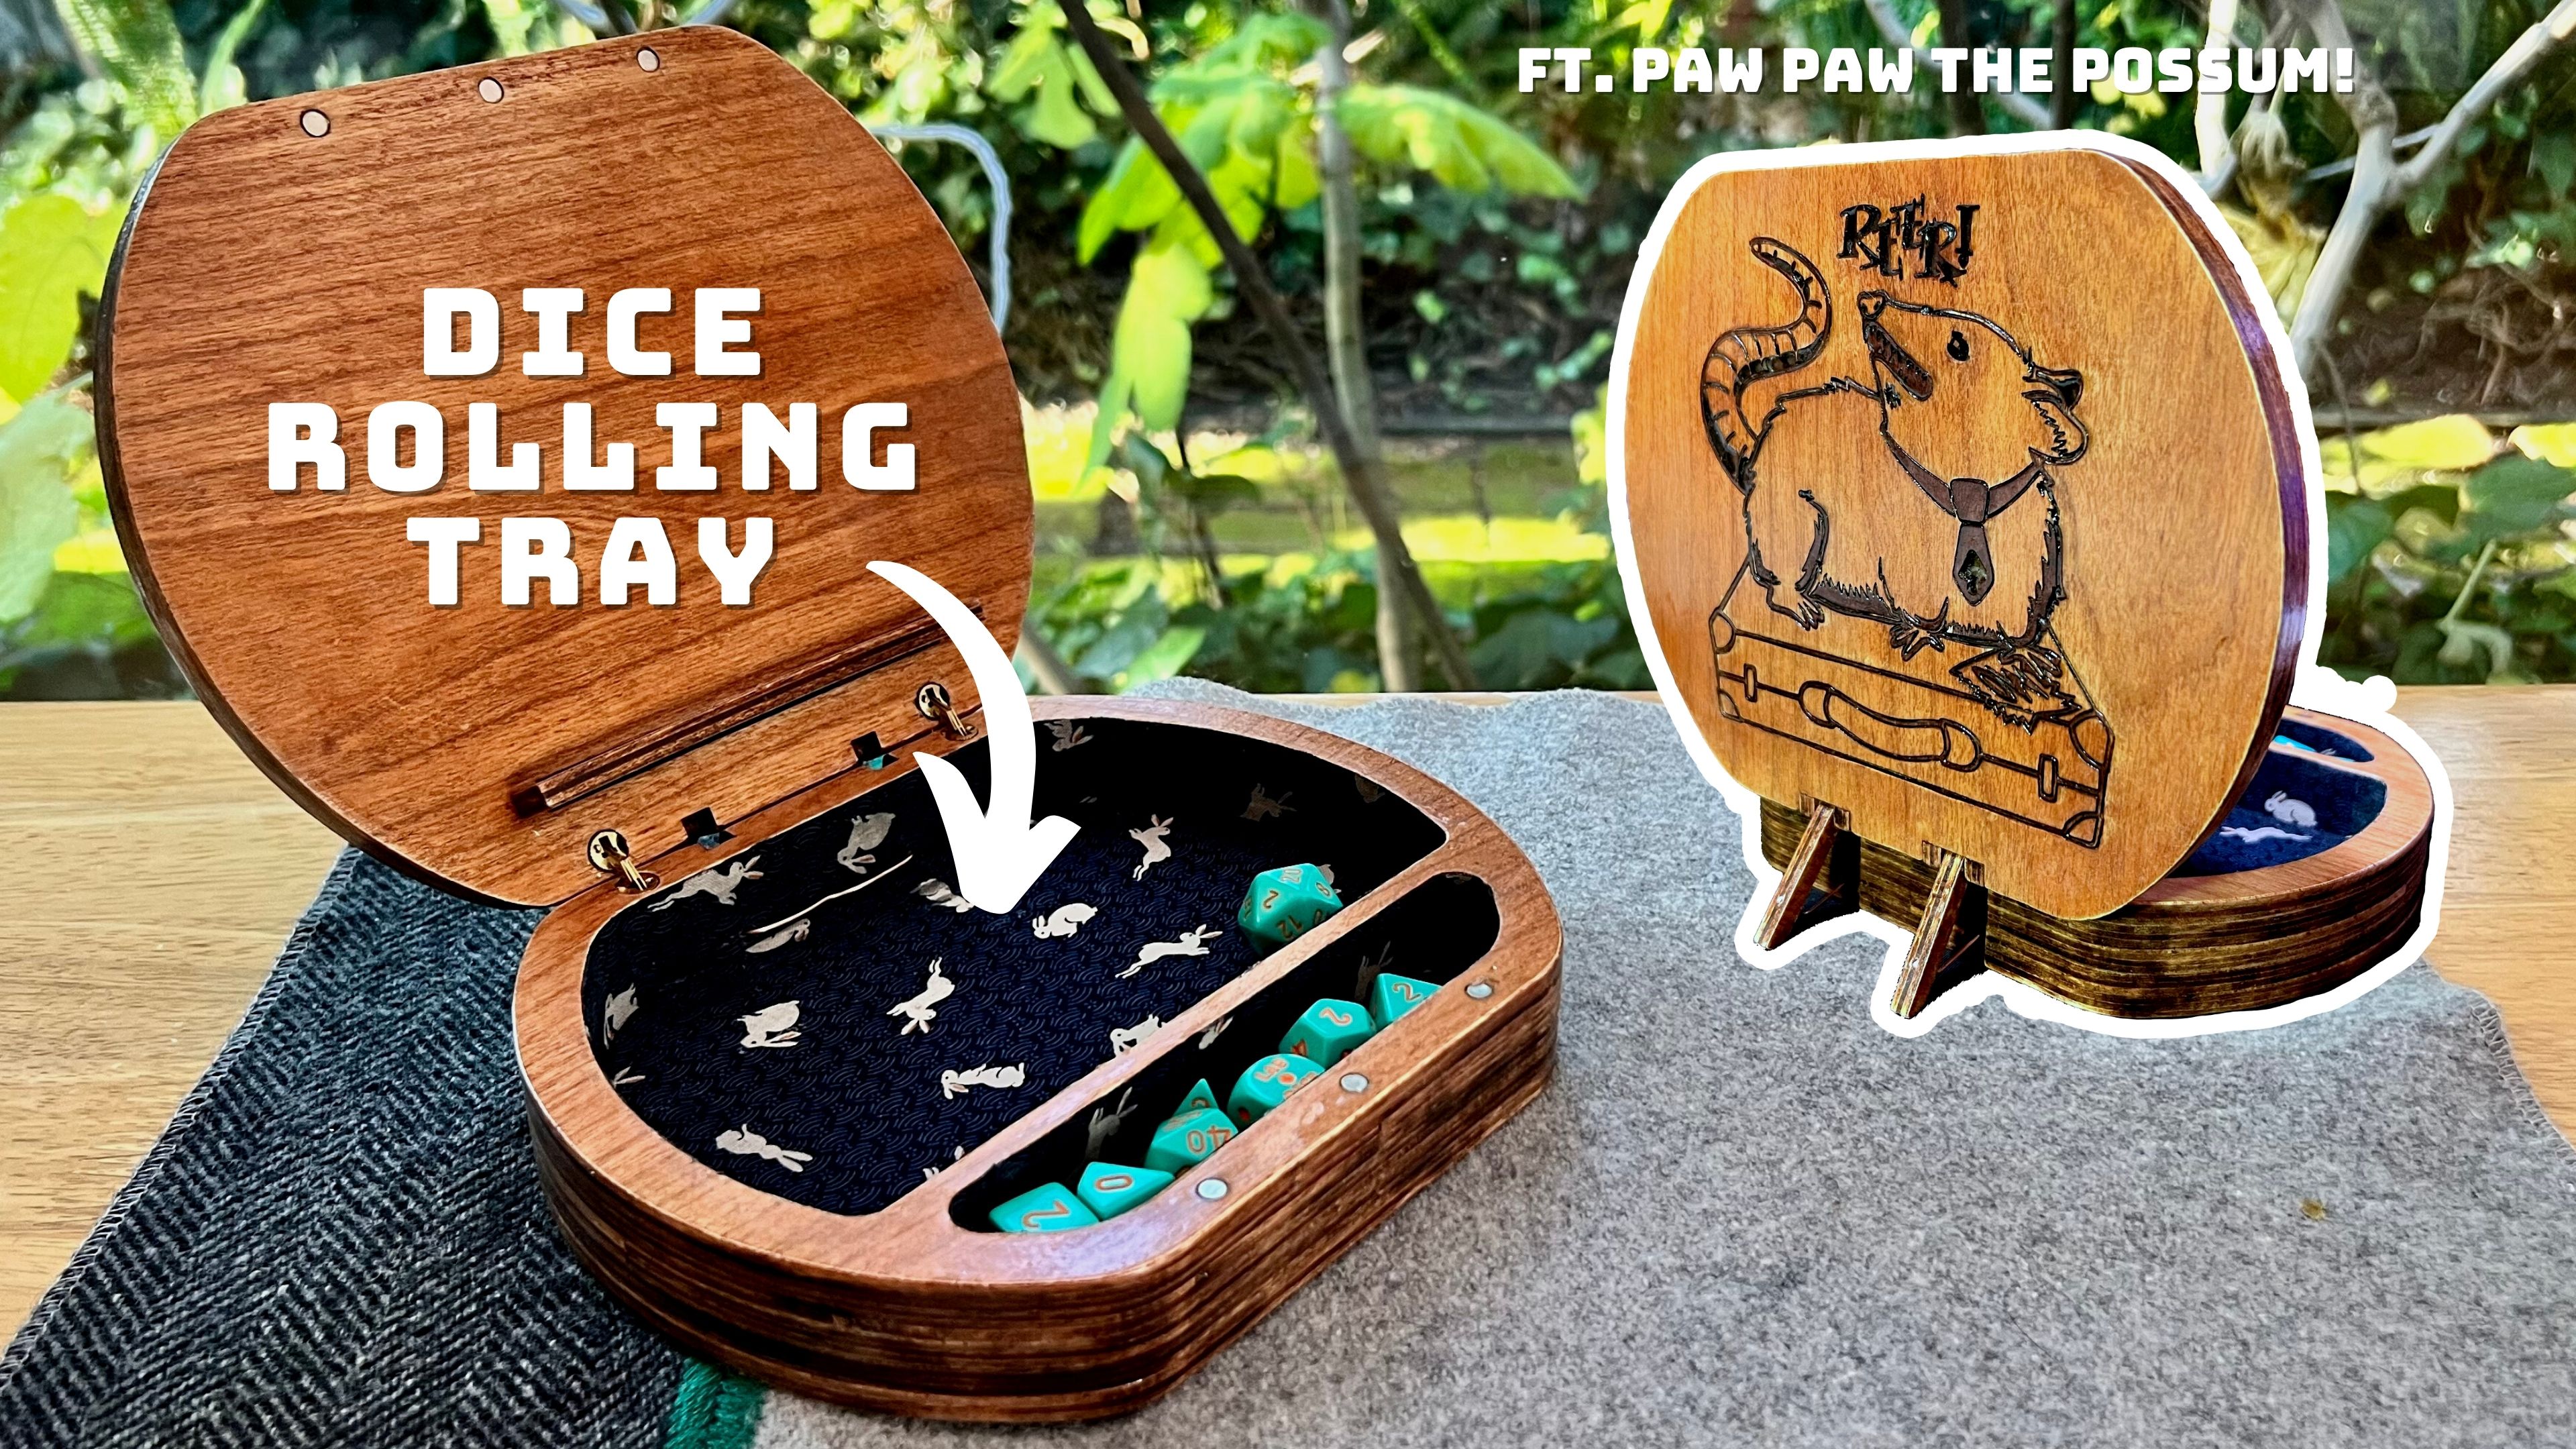 A dice rolling tray.